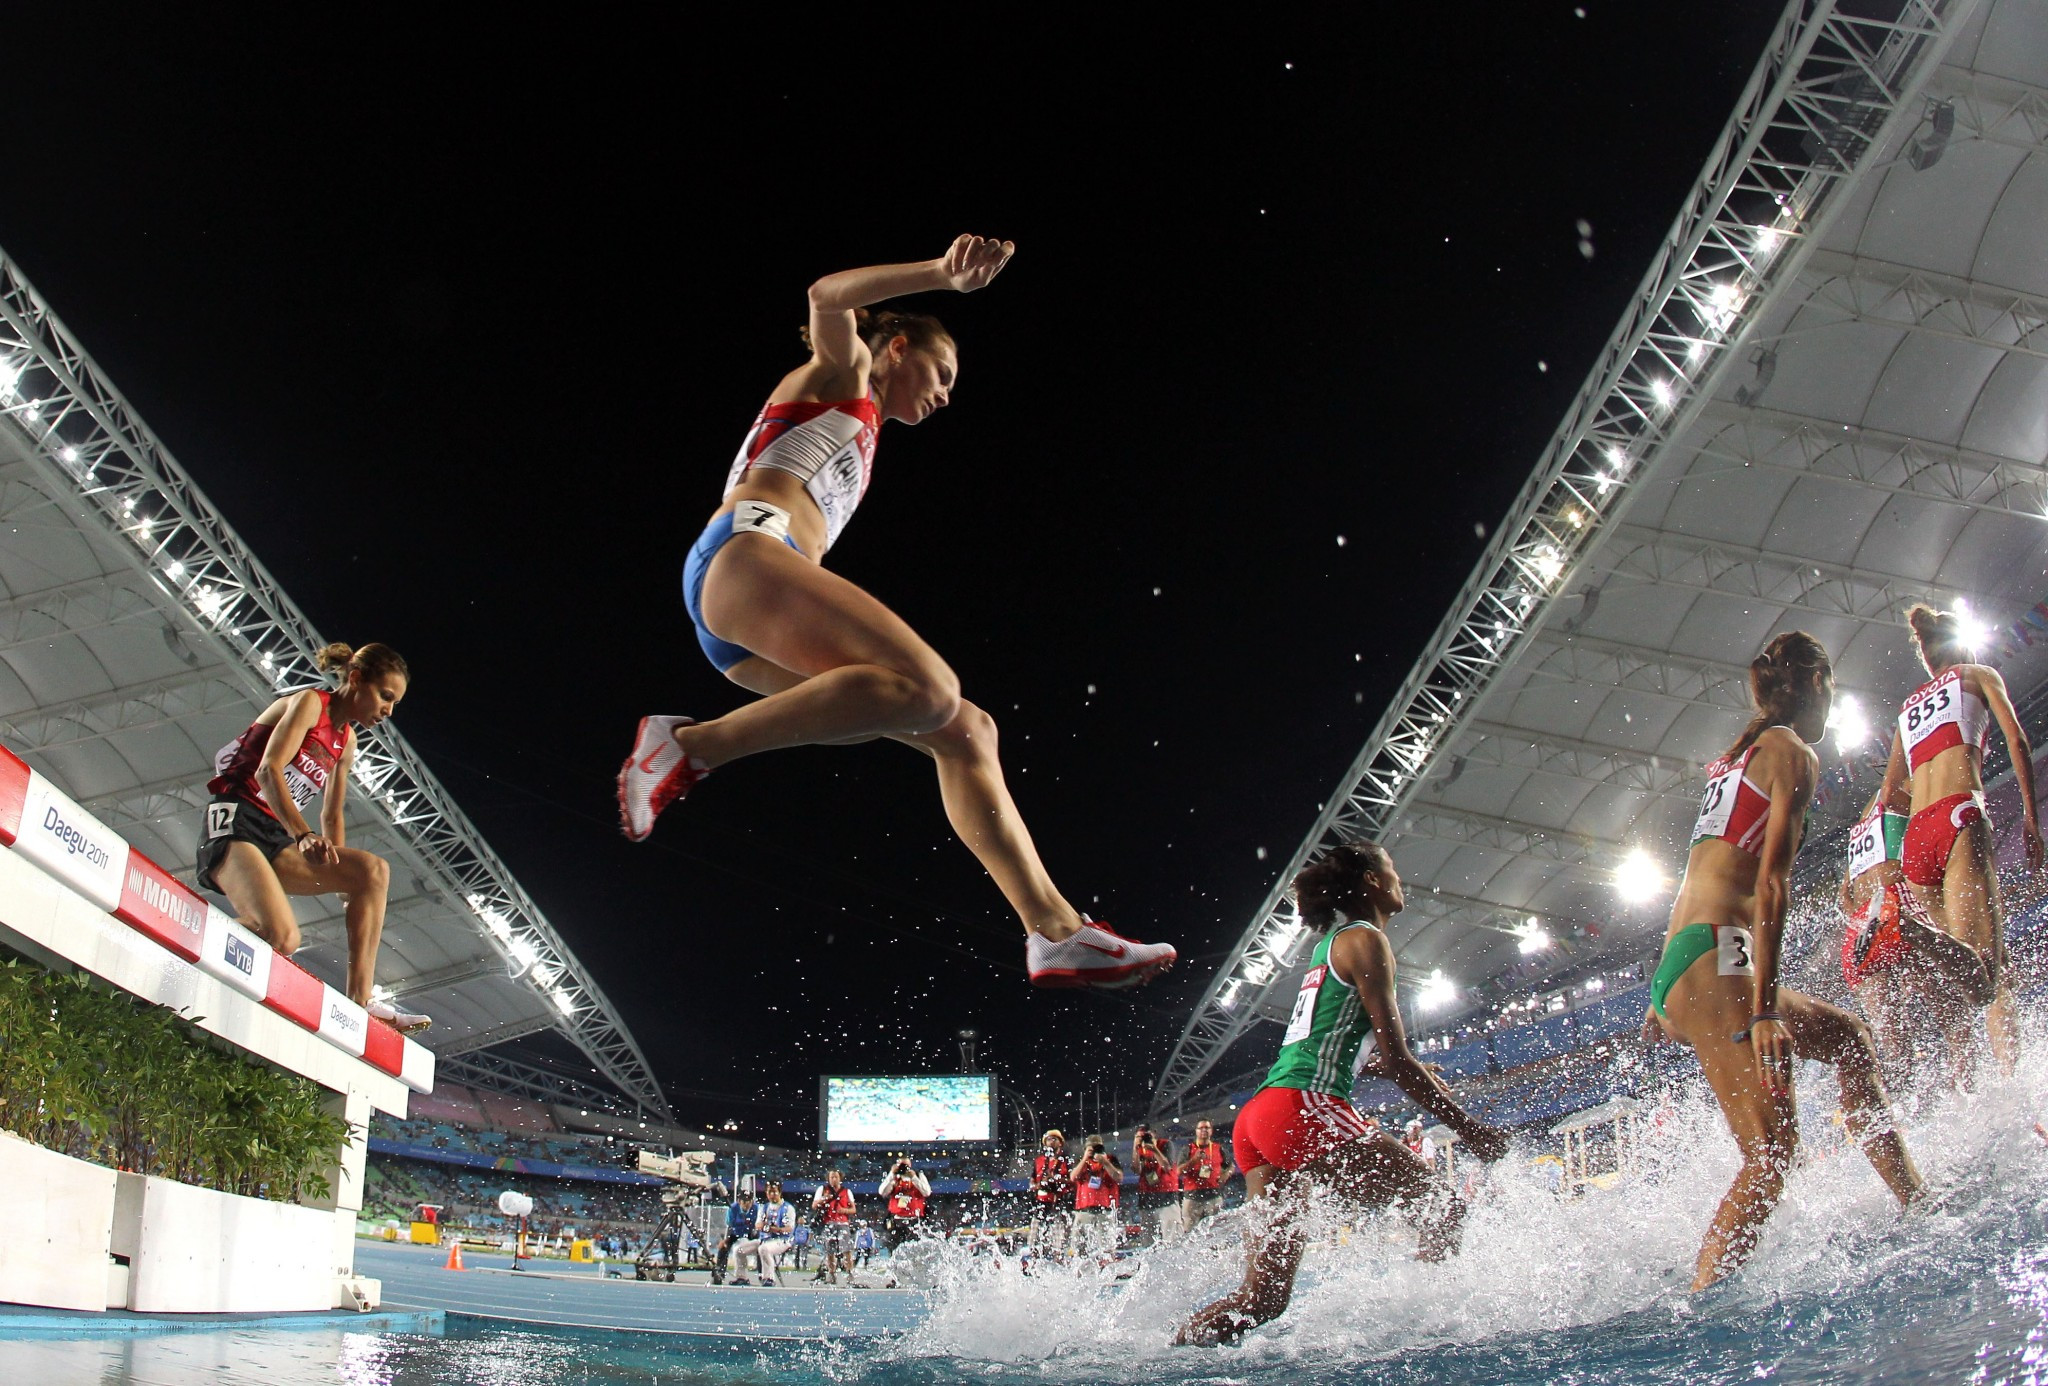 Lyubov Kharlamova also competed at the 2011 World Championships in Daegu in the 3,000m steeplechase ©Getty Images